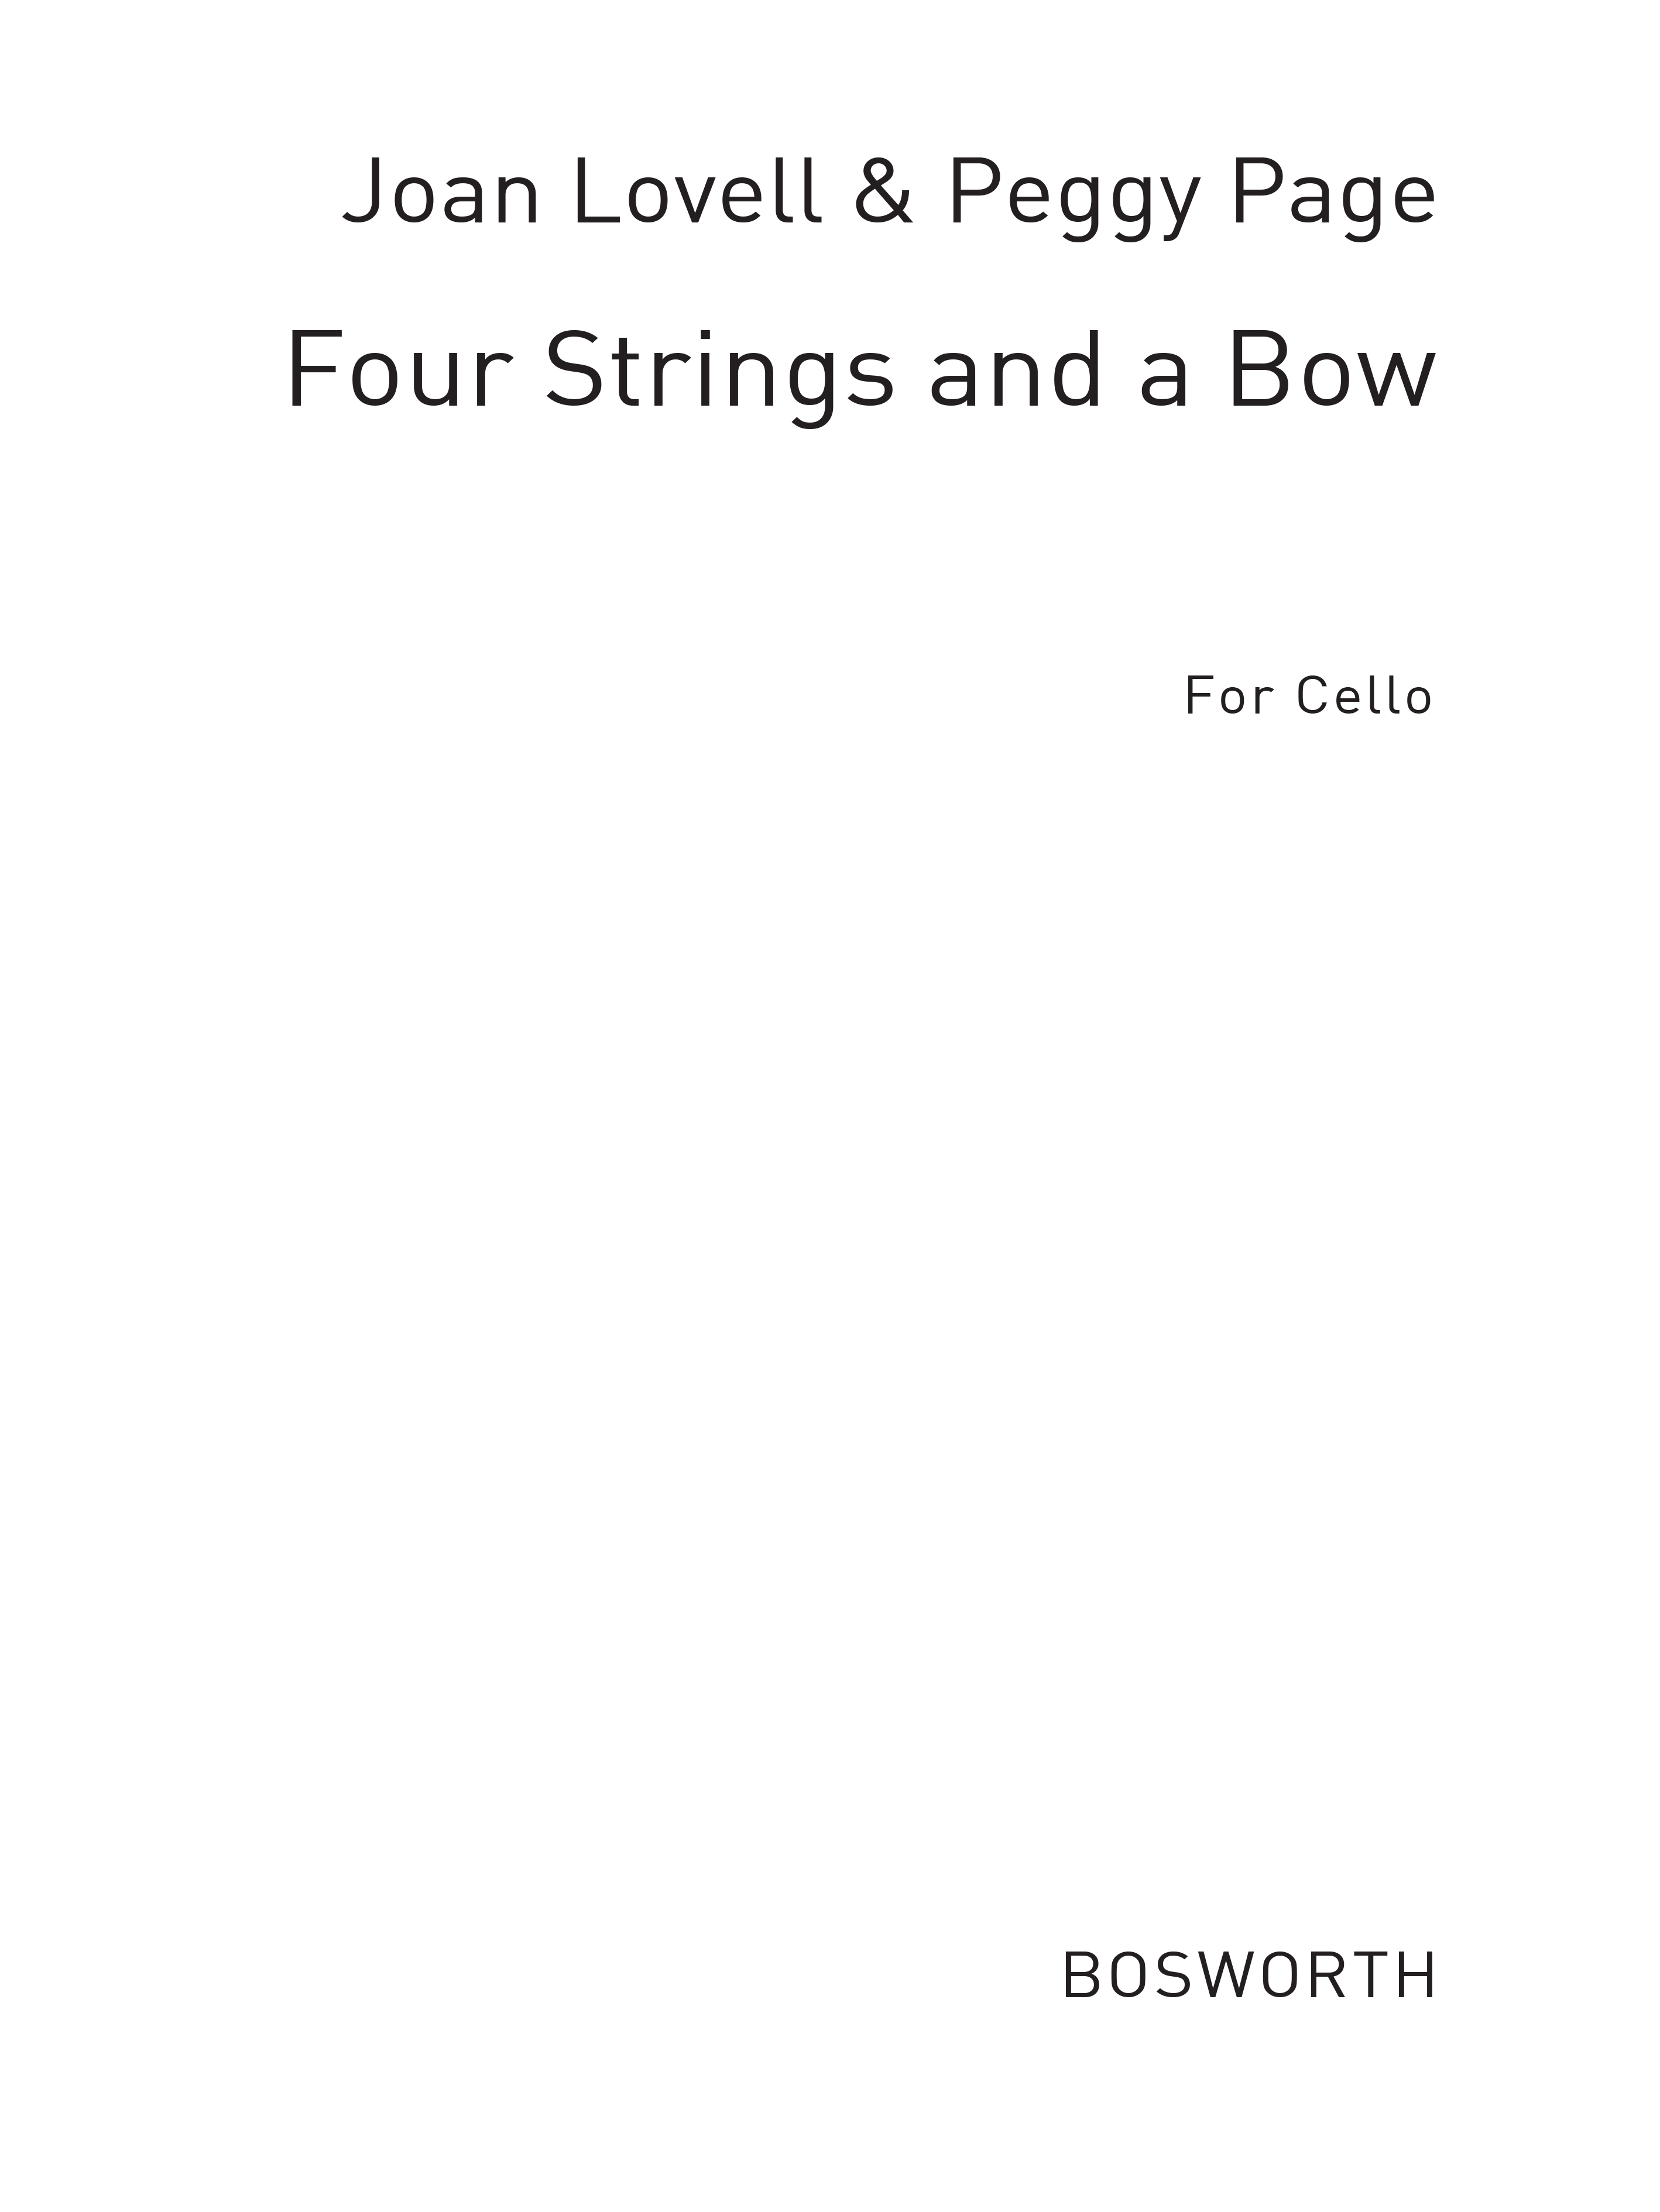 Joan Lovell Peggy Page: Four Strings And A Bow Book 1 (Cello Part): Cello: